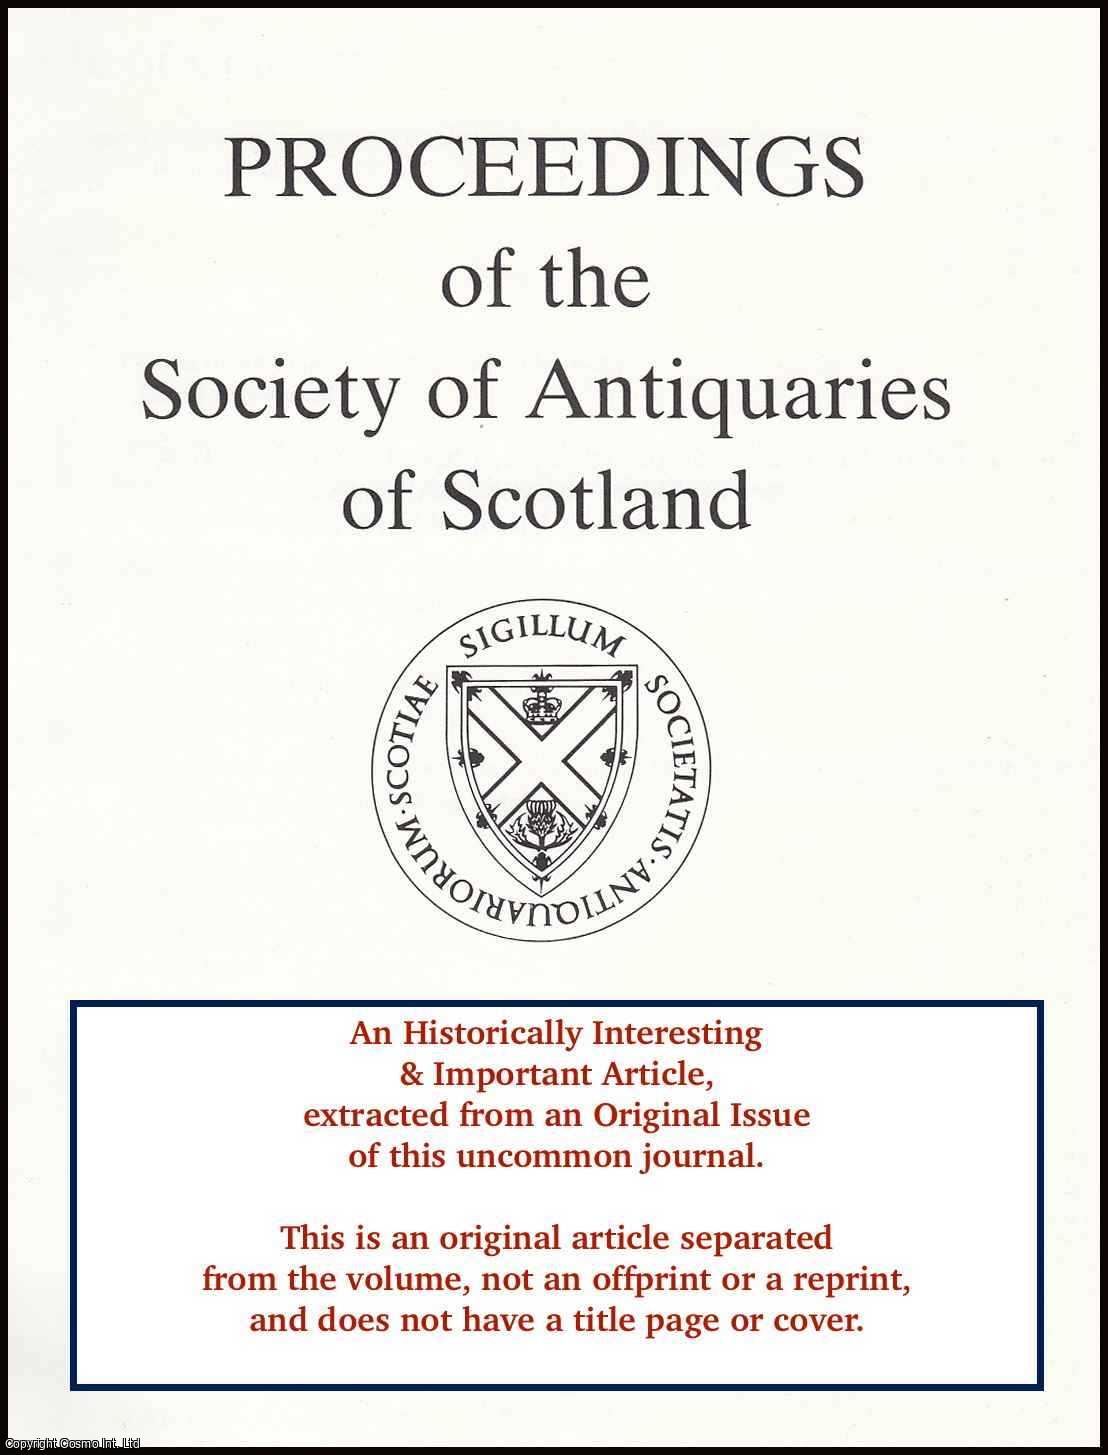 J. Lewis - The Excavation of an 18th Century Salt-Pan at St Monance, Fife. An original article from the Society of Antiquaries of Scotland, 1989.